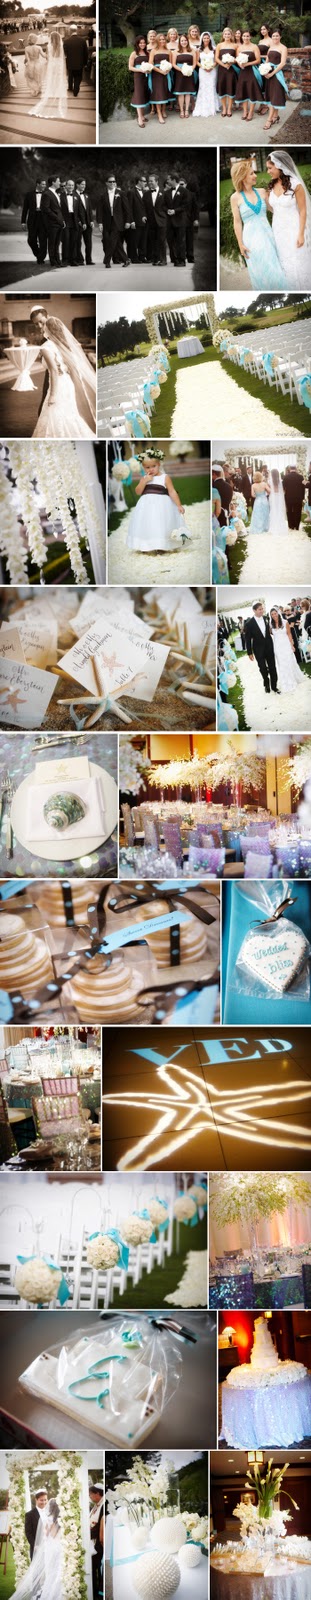 The lovely details create a very elegant beautiful wedding from the linens 